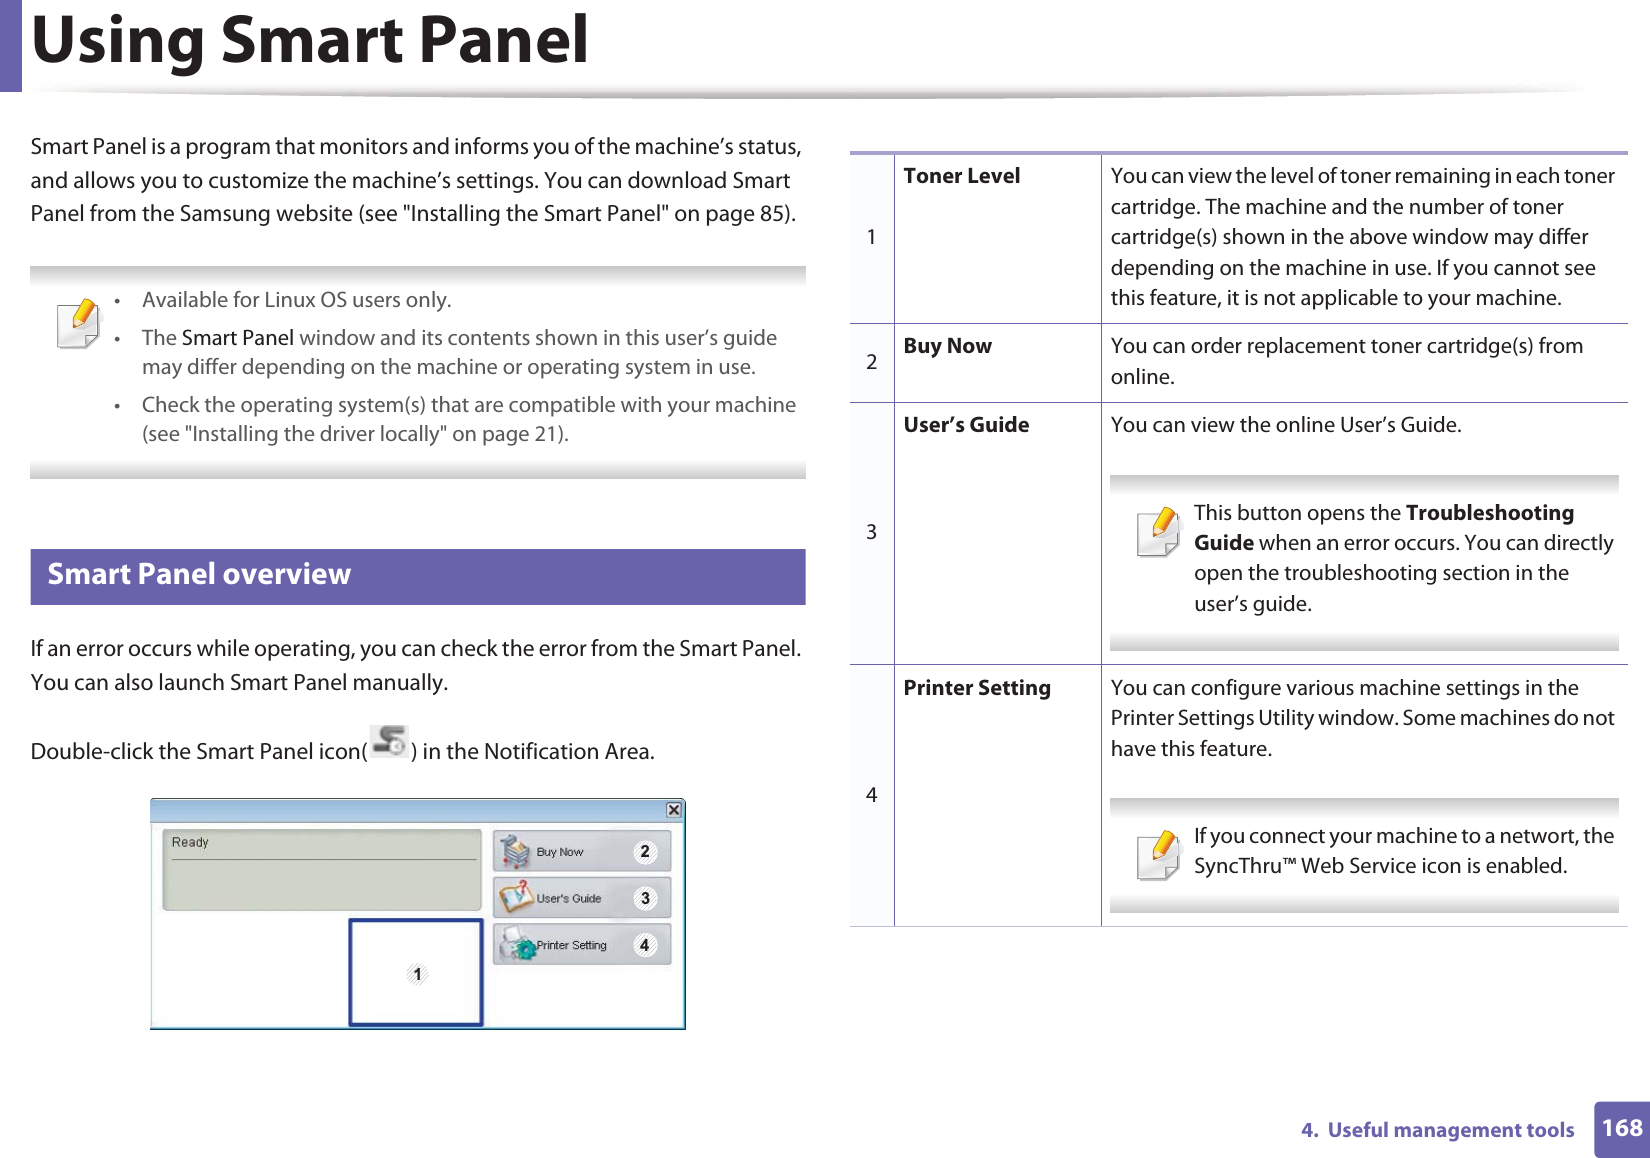 1684.  Useful management toolsUsing Smart PanelSmart Panel is a program that monitors and informs you of the machine’s status, and allows you to customize the machine’s settings. You can download Smart Panel from the Samsung website (see &quot;Installing the Smart Panel&quot; on page 85). • Available for Linux OS users only.• The Smart Panel window and its contents shown in this user’s guide may differ depending on the machine or operating system in use.• Check the operating system(s) that are compatible with your machine (see &quot;Installing the driver locally&quot; on page 21). 8 Smart Panel overviewIf an error occurs while operating, you can check the error from the Smart Panel. You can also launch Smart Panel manually.Double-click the Smart Panel icon( ) in the Notification Area.1 2341Toner Level You can view the level of toner remaining in each toner cartridge. The machine and the number of toner cartridge(s) shown in the above window may differ depending on the machine in use. If you cannot see this feature, it is not applicable to your machine.2Buy Now You can order replacement toner cartridge(s) from online.3User’s Guide You can view the online User’s Guide. This button opens the Troubleshooting Guide when an error occurs. You can directly open the troubleshooting section in the user’s guide.  4Printer Setting You can configure various machine settings in the Printer Settings Utility window. Some machines do not have this feature. If you connect your machine to a networt, the SyncThru™ Web Service icon is enabled. 